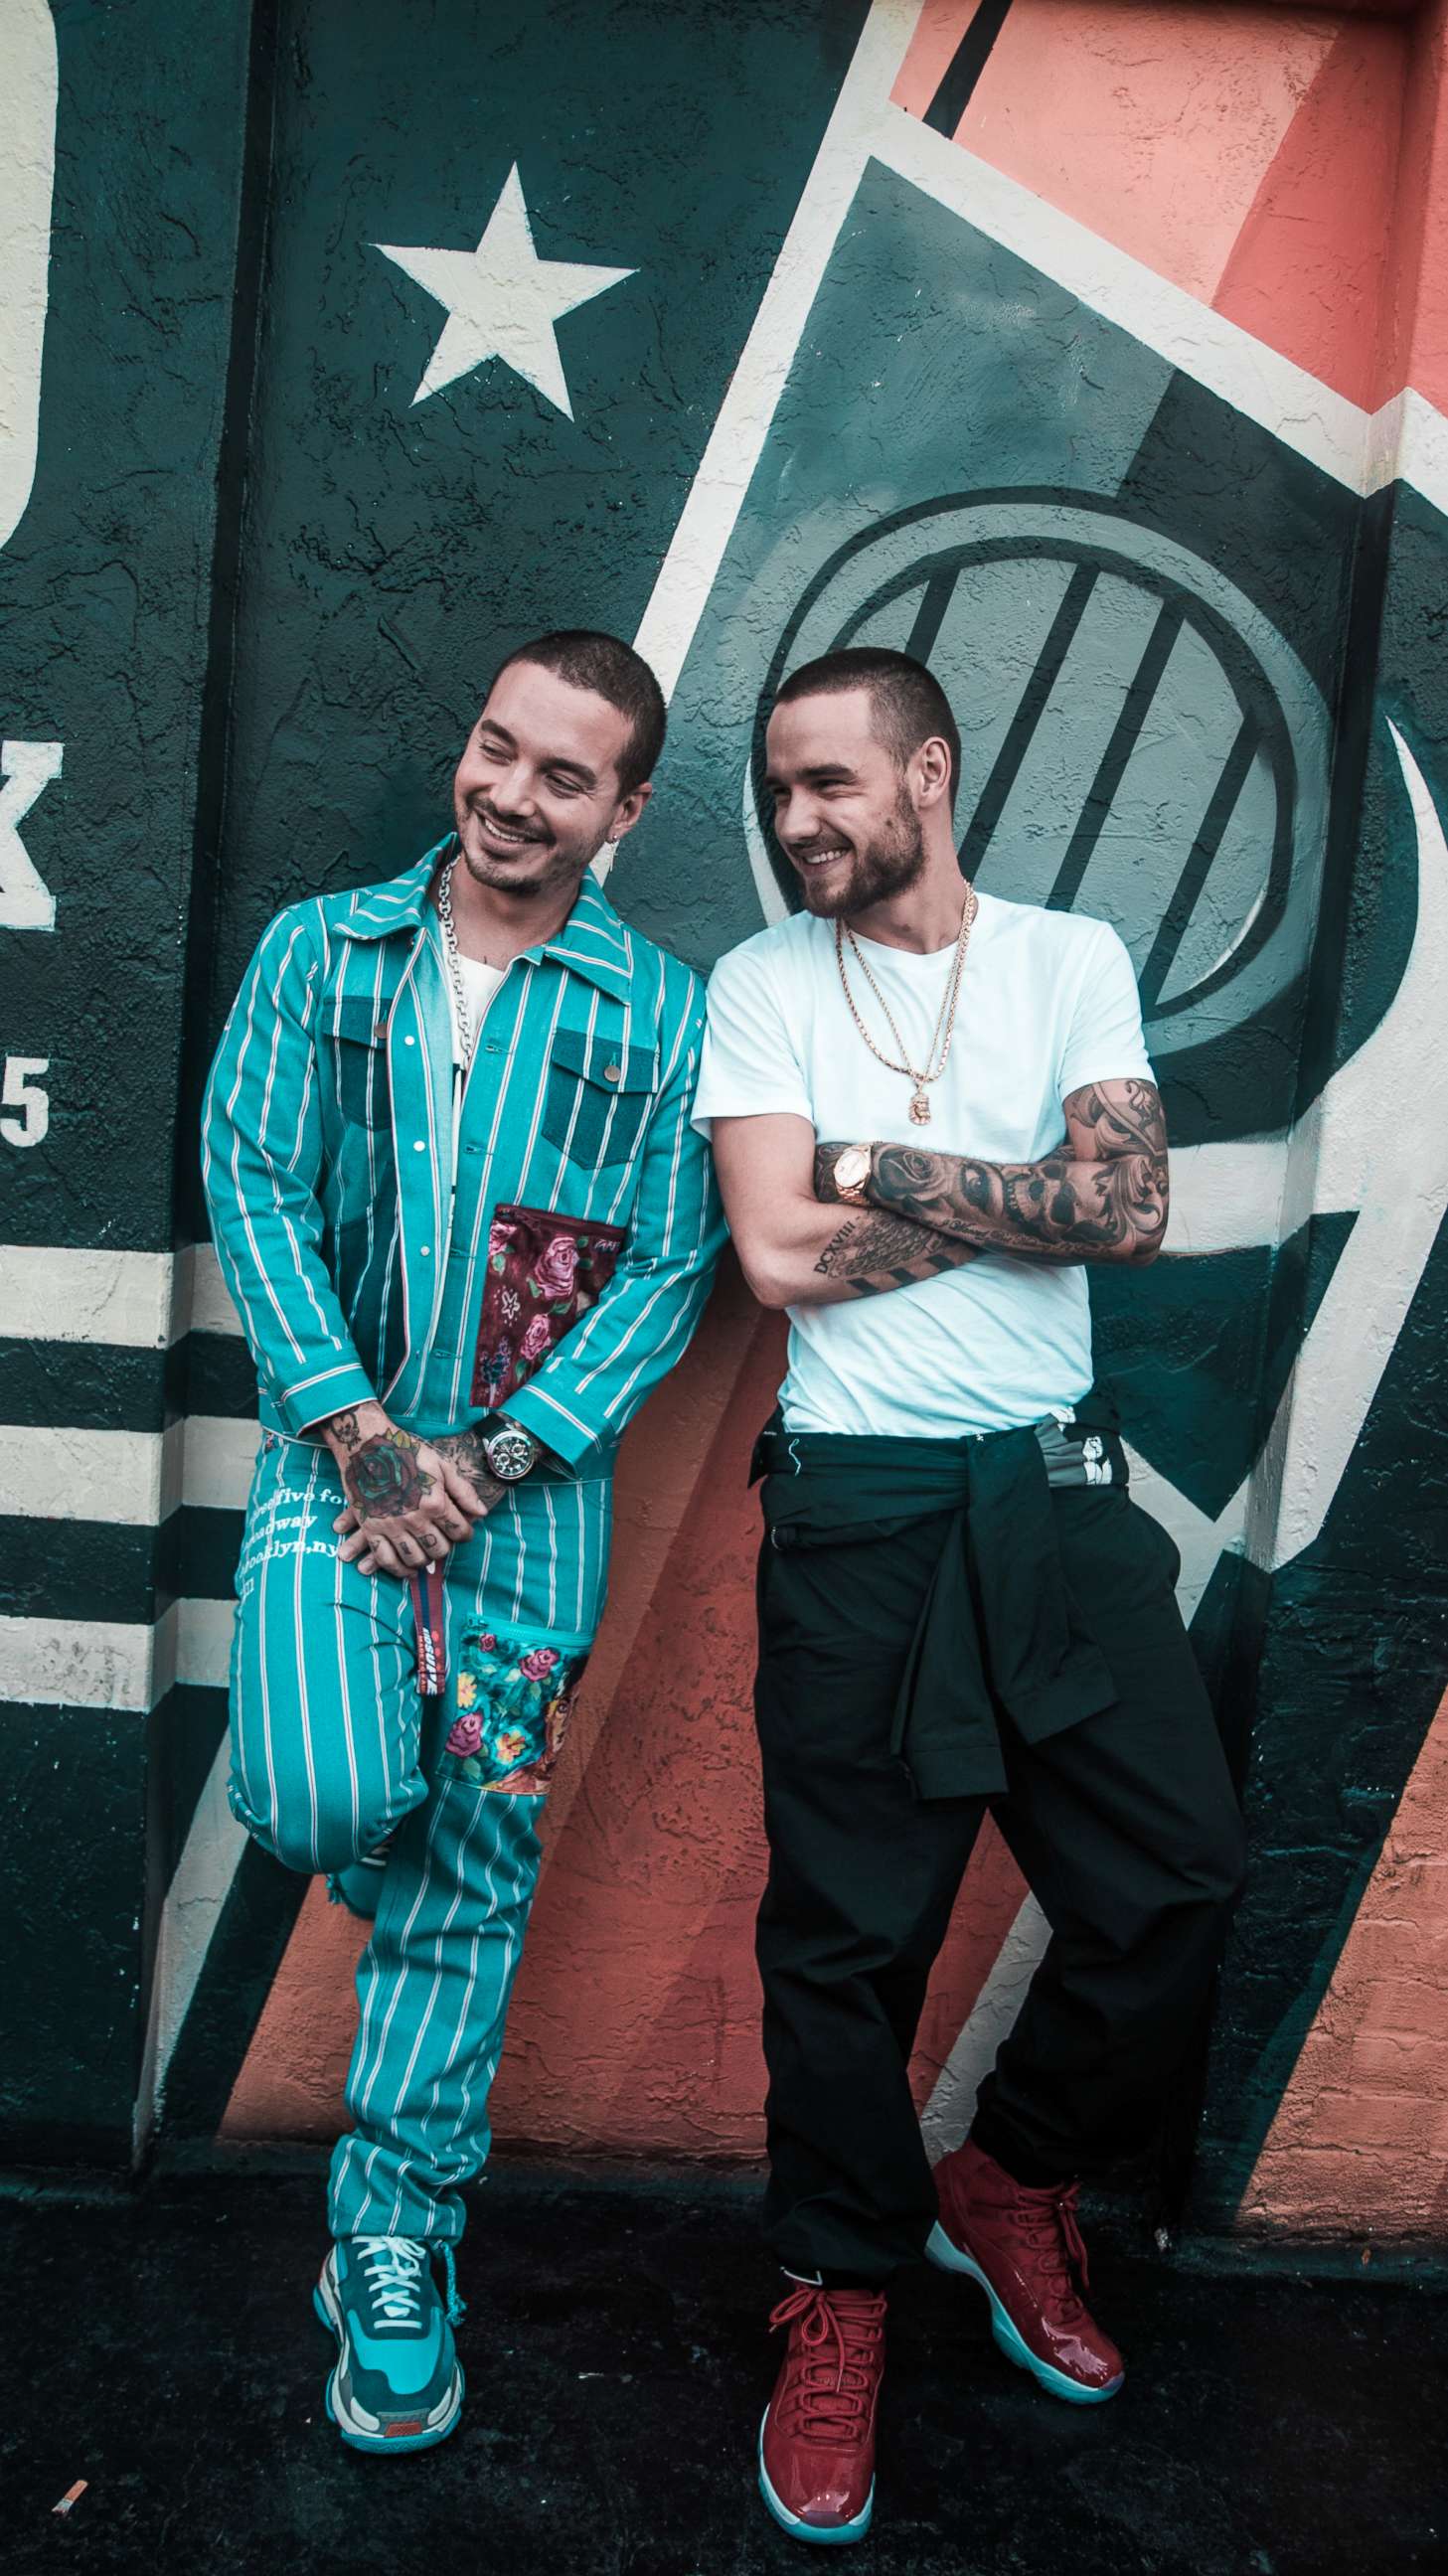 PHOTO: Liam Payne and J Balvin kick off our party in the park - GMA's Summer Concert Series! 